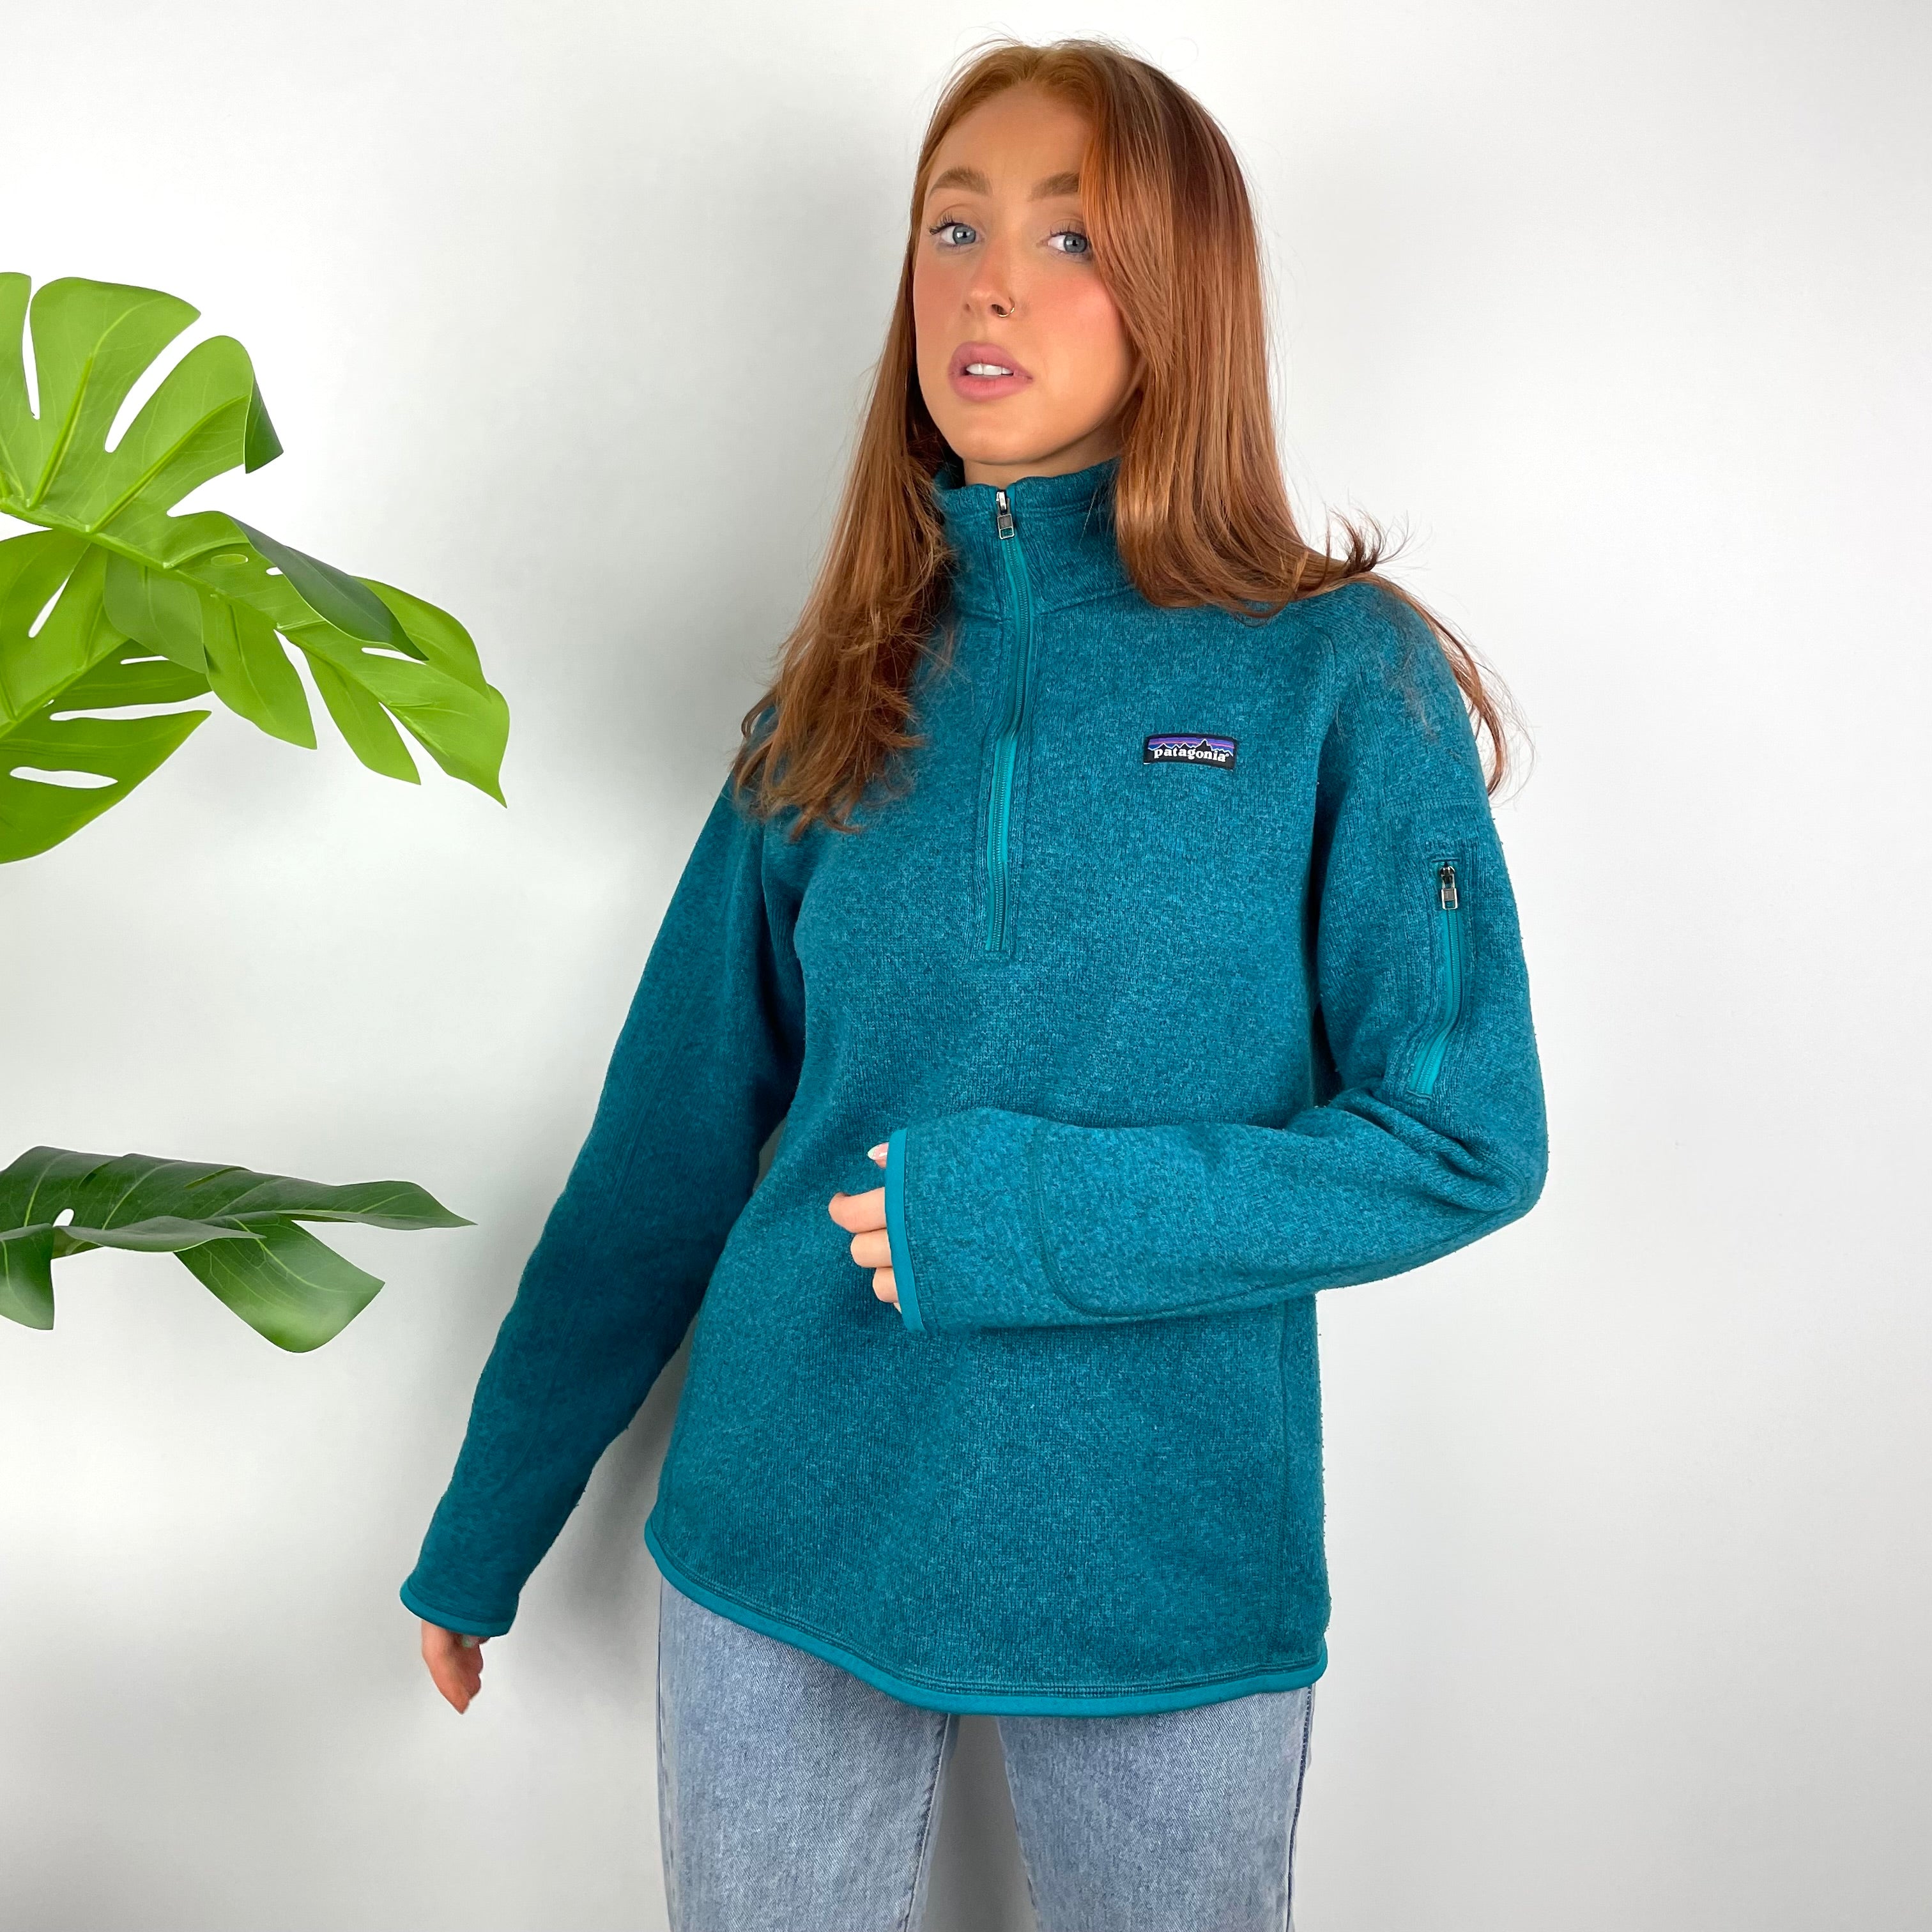 Patagonia RARE Turquoise Blue Embroidered Spell Out Quarter Zip Sweatshirt (L)